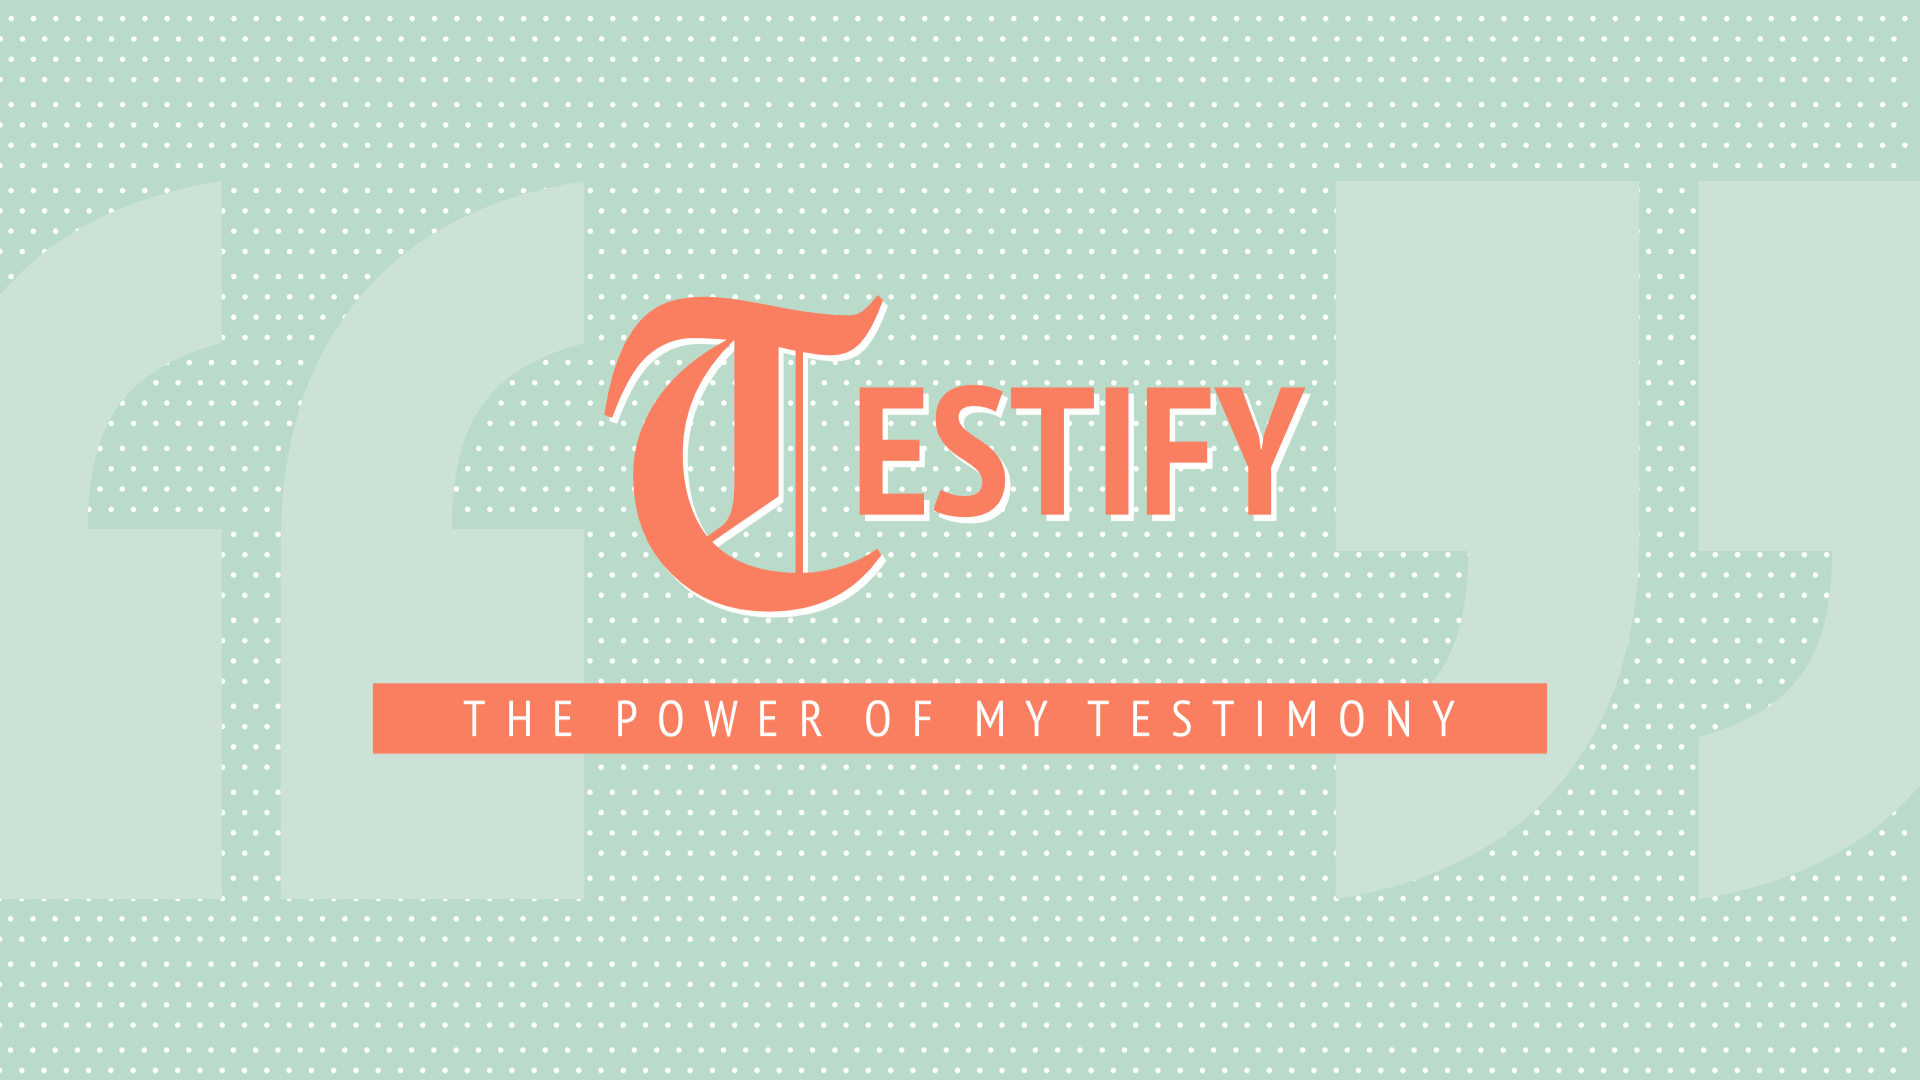 Testify: 6 Actions that Influence Others